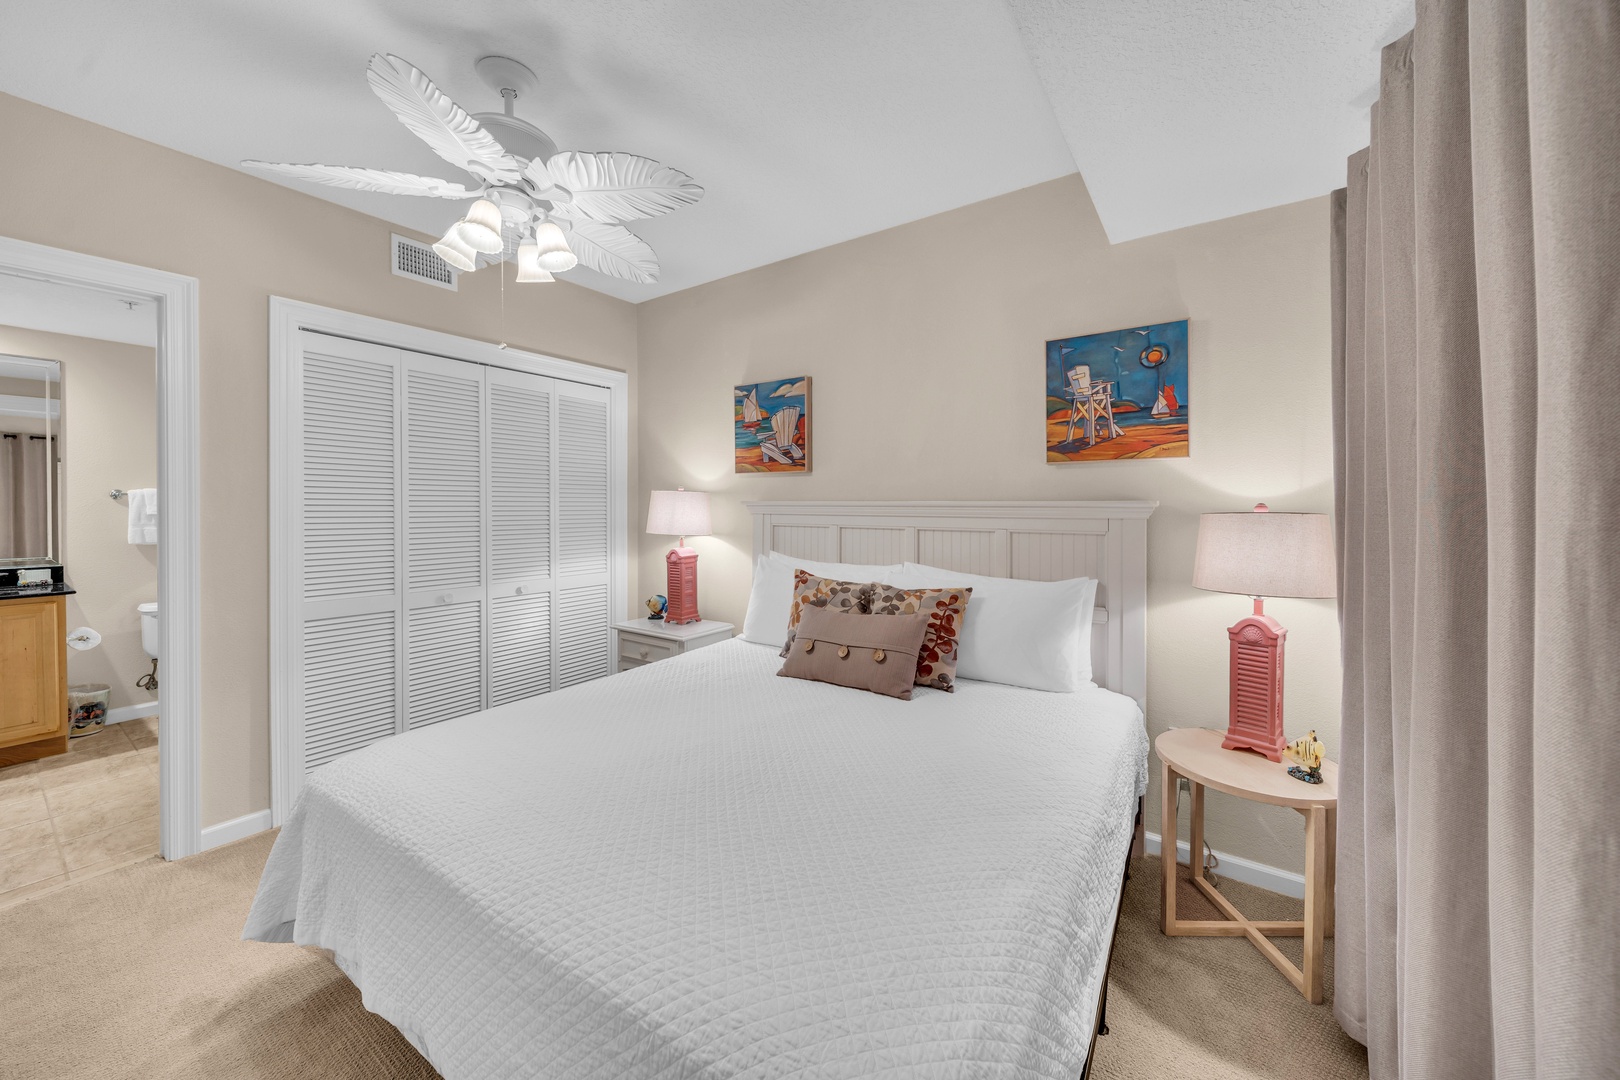 2nd guest bedroom, where comfort and elegance blend seamlessly.